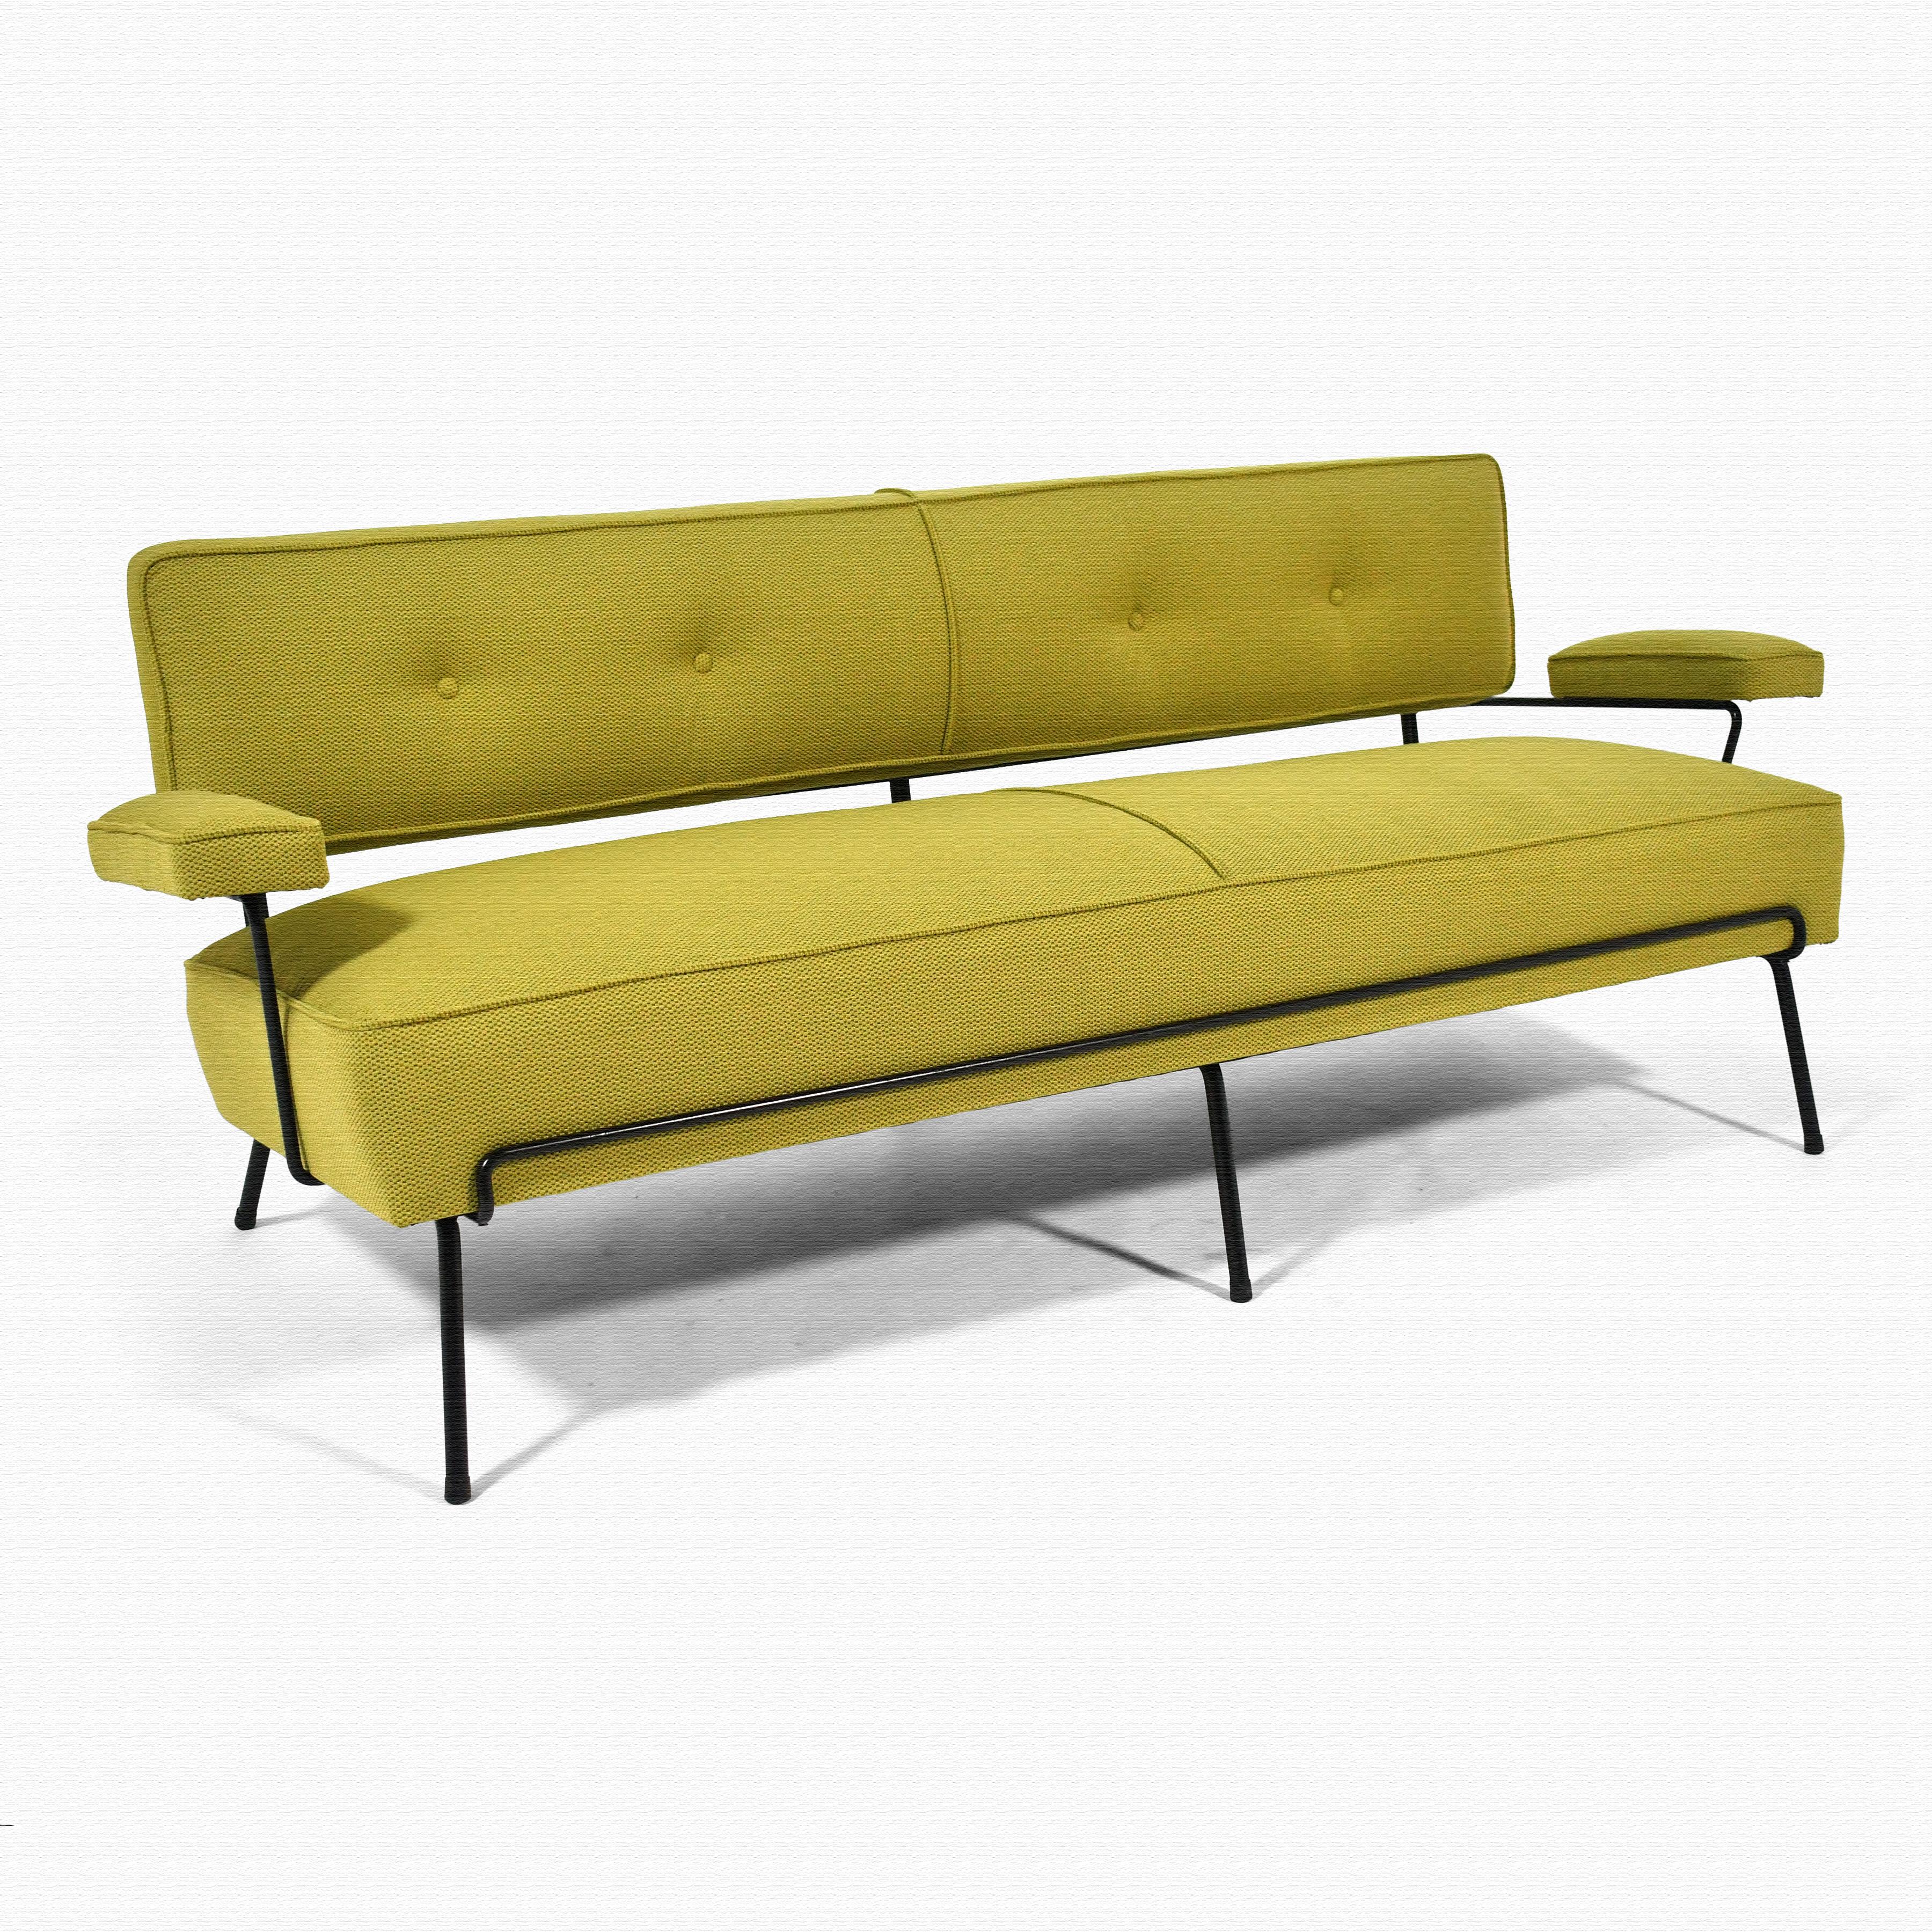 This terrific sofa  with it's floating back and arms attached to the iron frame is classic  post-war design. Attributed to William Armbruster for Edgewood Furniture.  A well built piece with terrific heft, it is entirely original and is just waiting